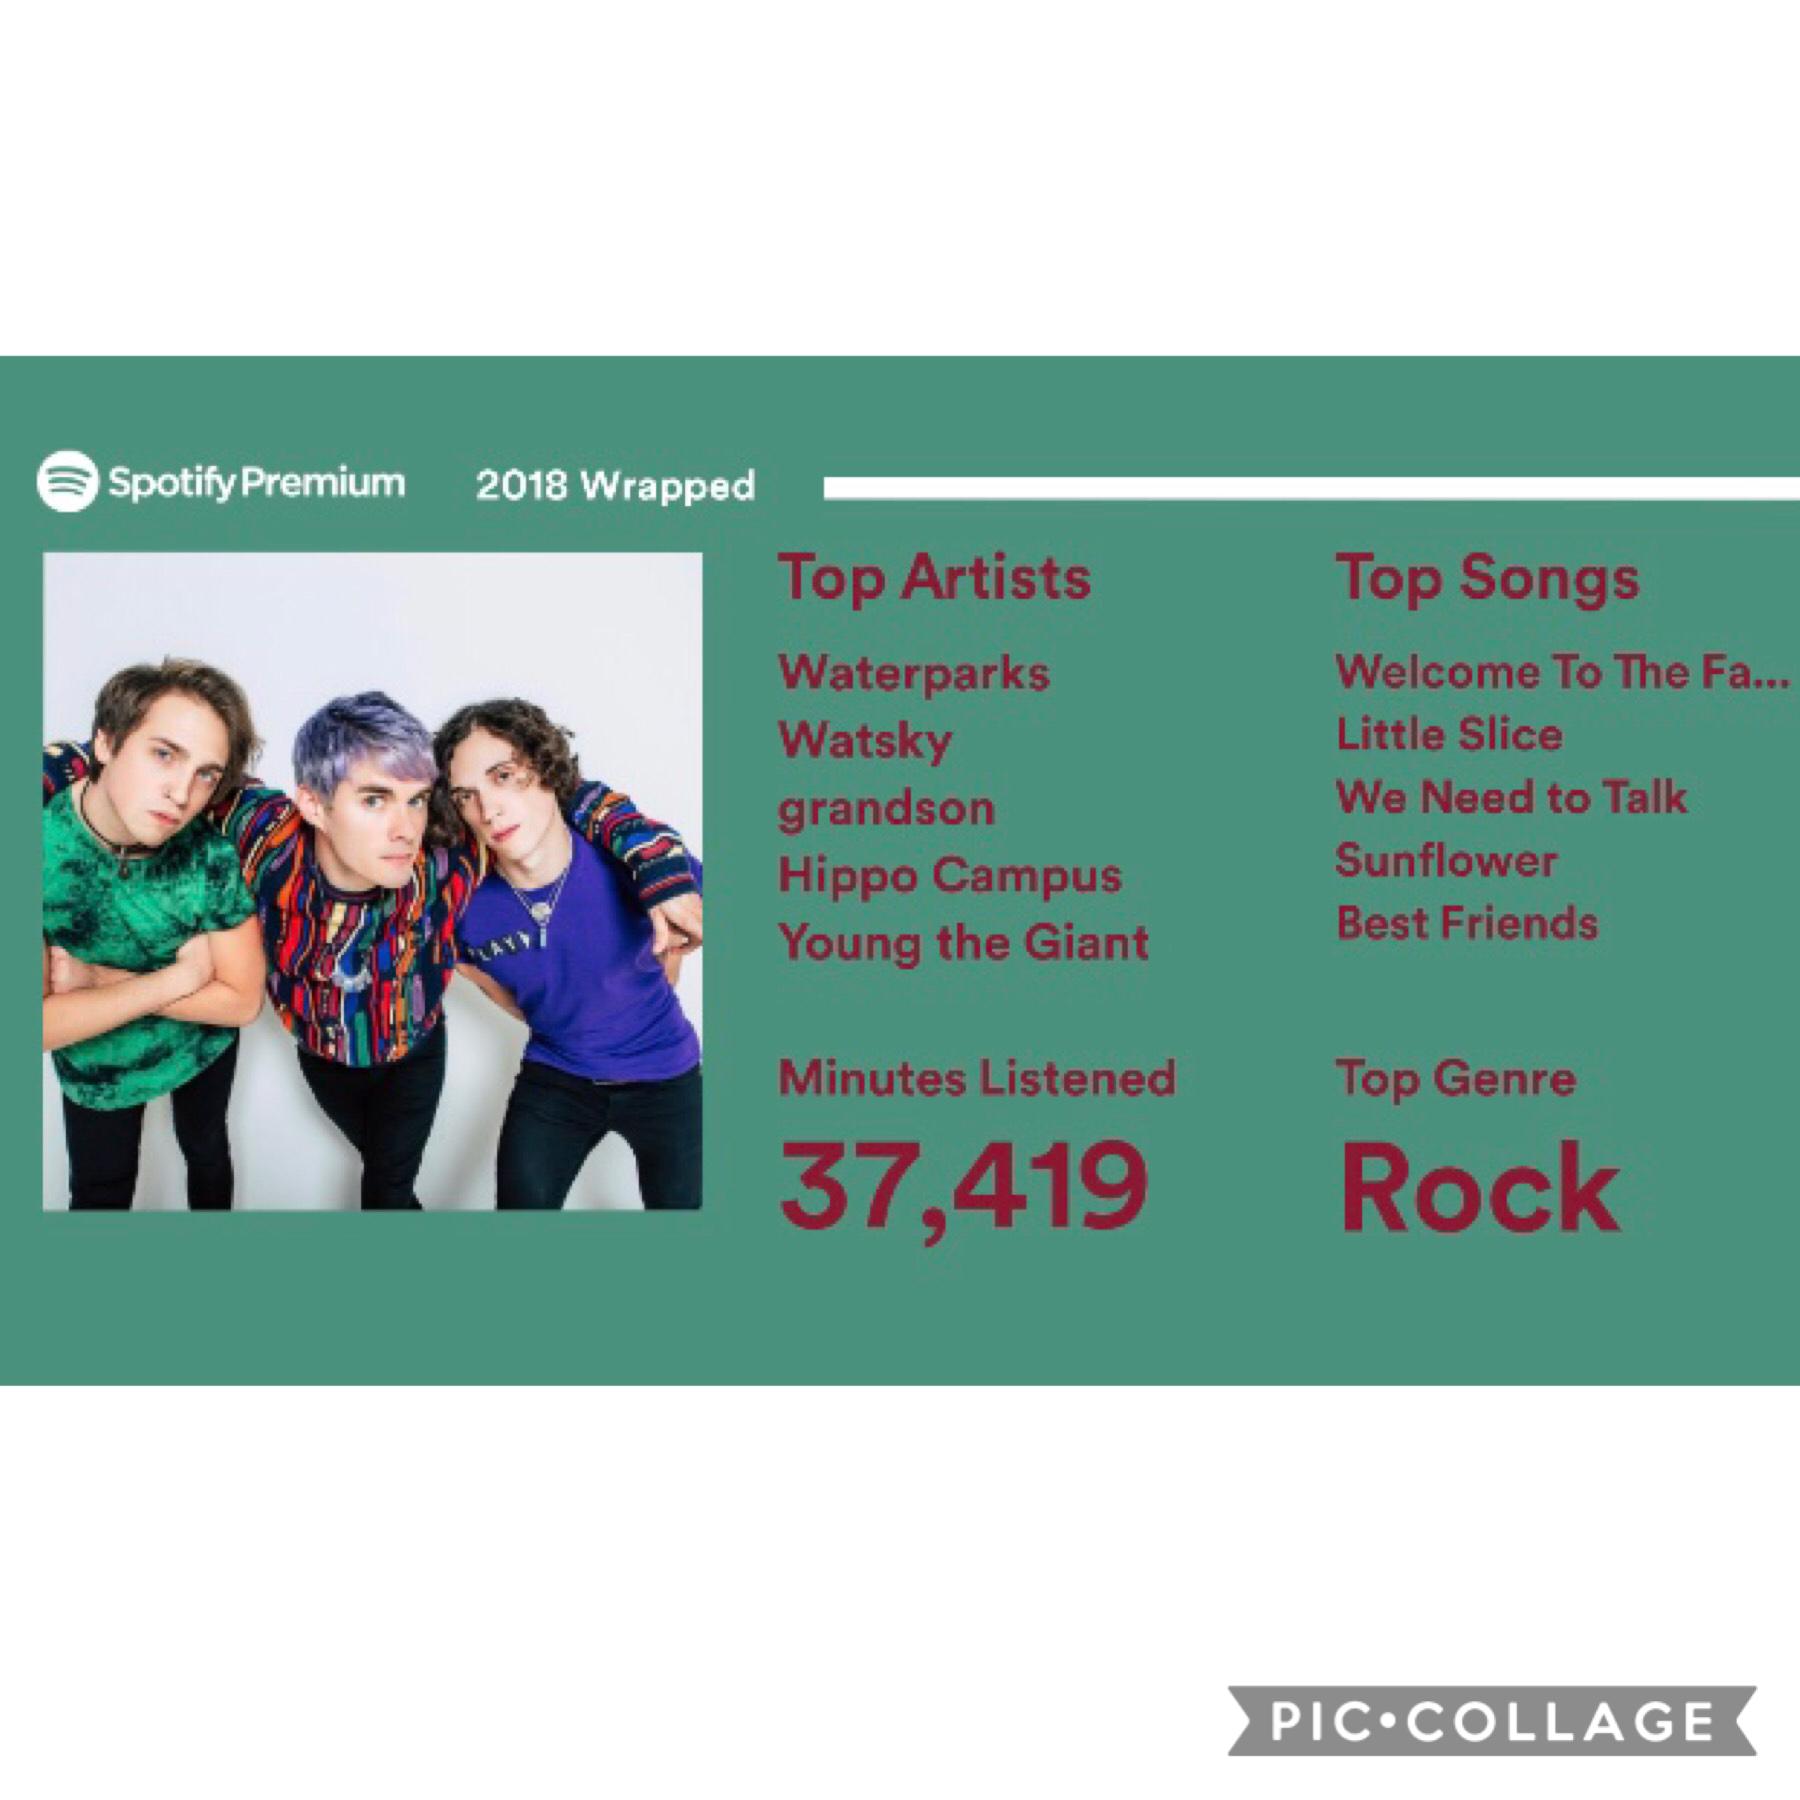 i’m so glad i got spotify early this year cuz this is sO COOL ahjskskks (also sorry for disappearing i’m busy reading queen of air and darkness lol)